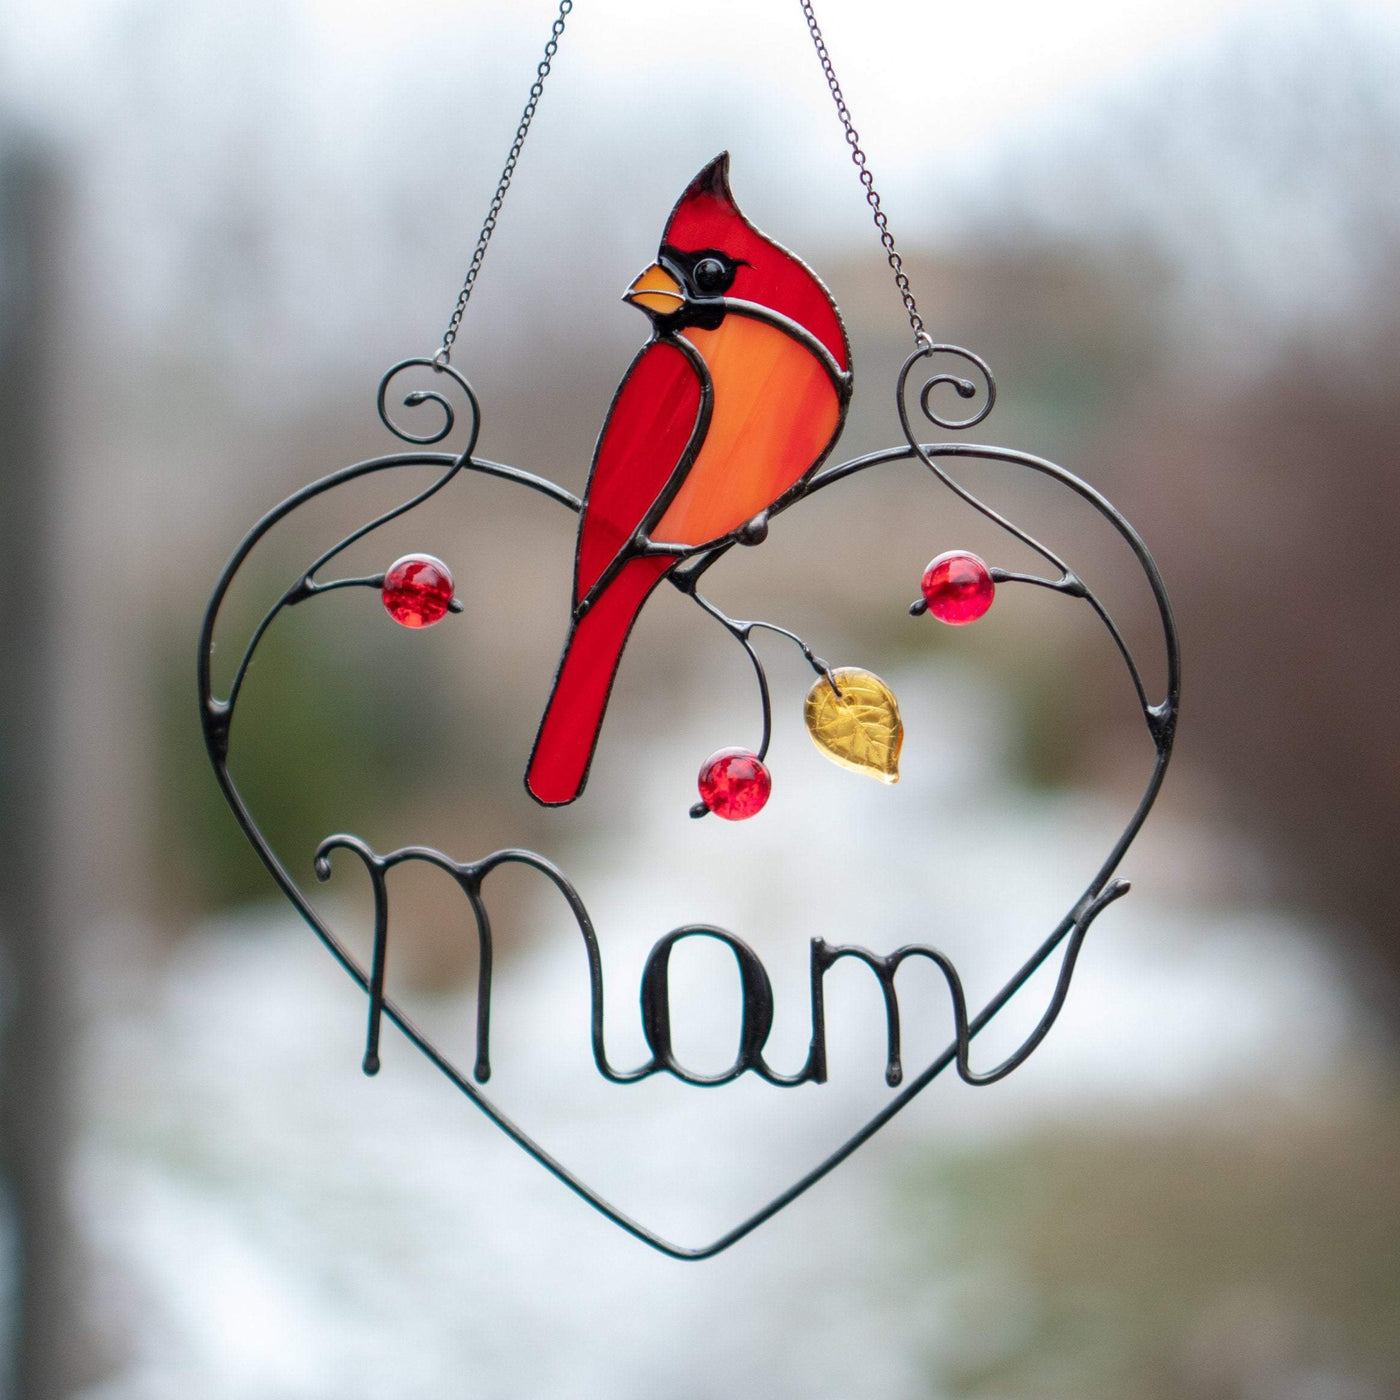 Stained glass redbird sitting on a wire heart with personalization suncatcher